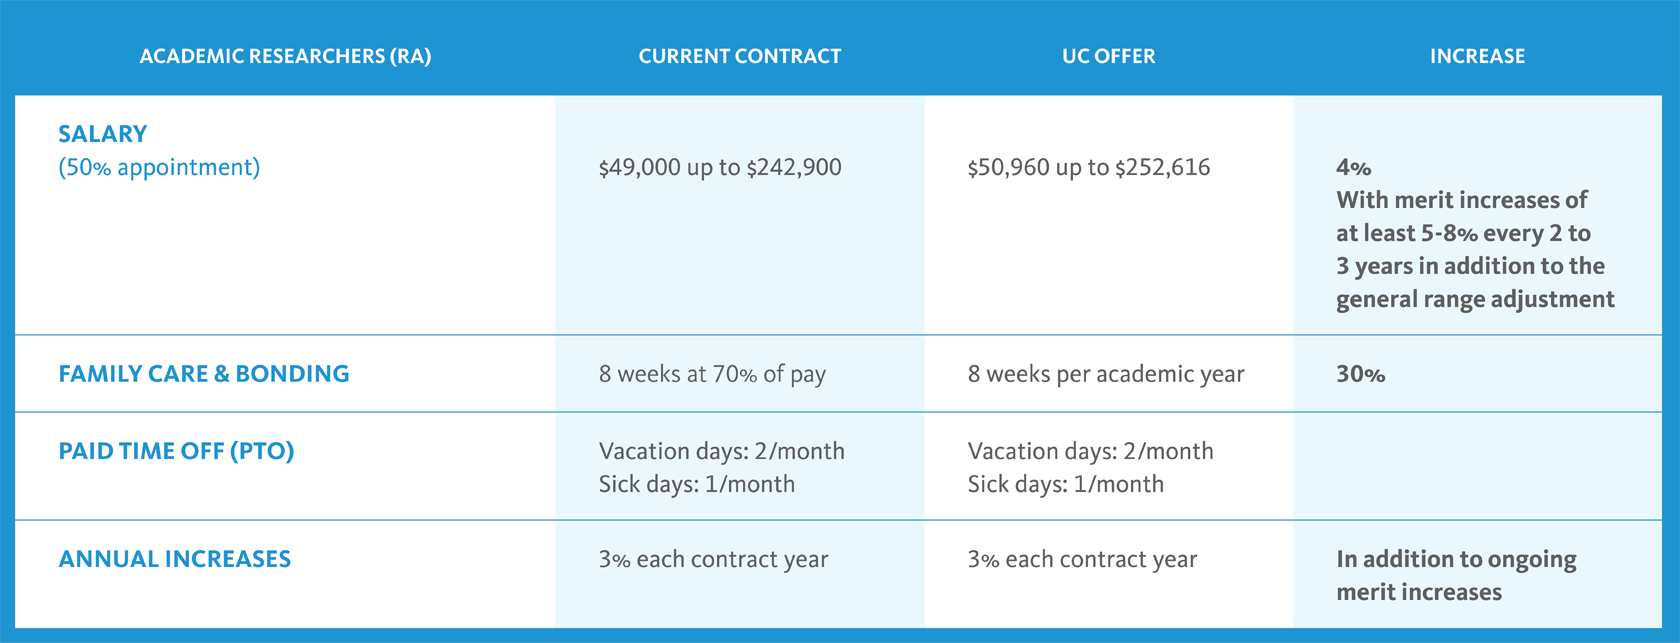 Chart showing current contract and the offer from UC for academic researchers